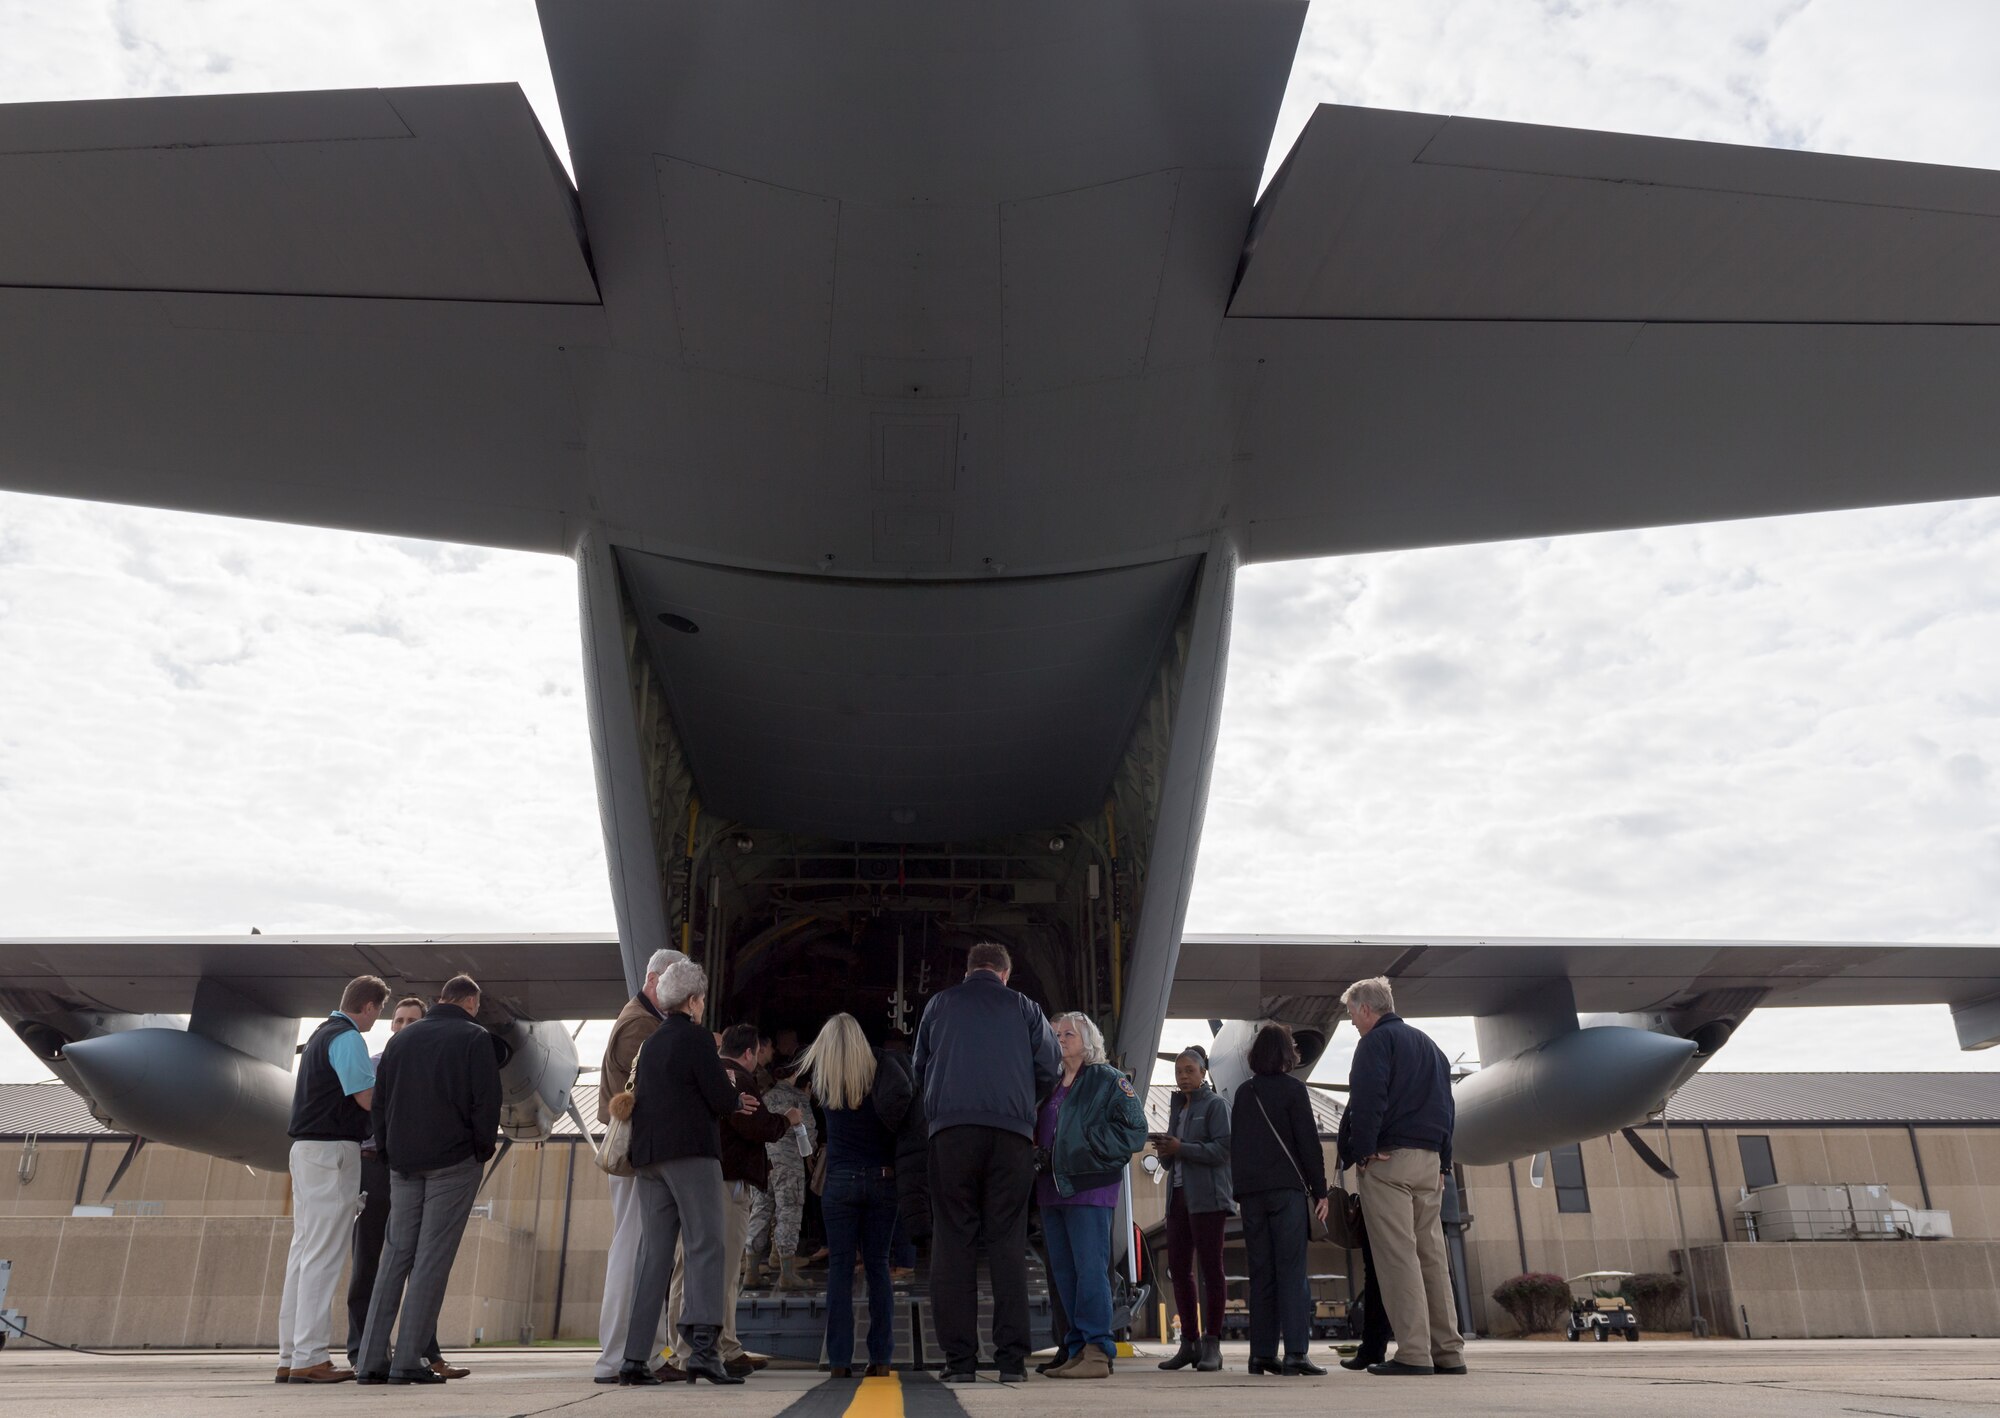 Keesler honorary commanders gather at the rear of a WC-130J Hercules during the 403rd Wing Honorary Commanders Tour at Keesler Air Force Base, Mississippi, March 08, 2019. The tour was intended to familiarize honorary commanders with the 403rd Wing and the Air Force Reserve mission and capabilities. The event also included an incentive flight on a WC-130J Hercules. (U.S. Air Force Photo by Andre' Askew)